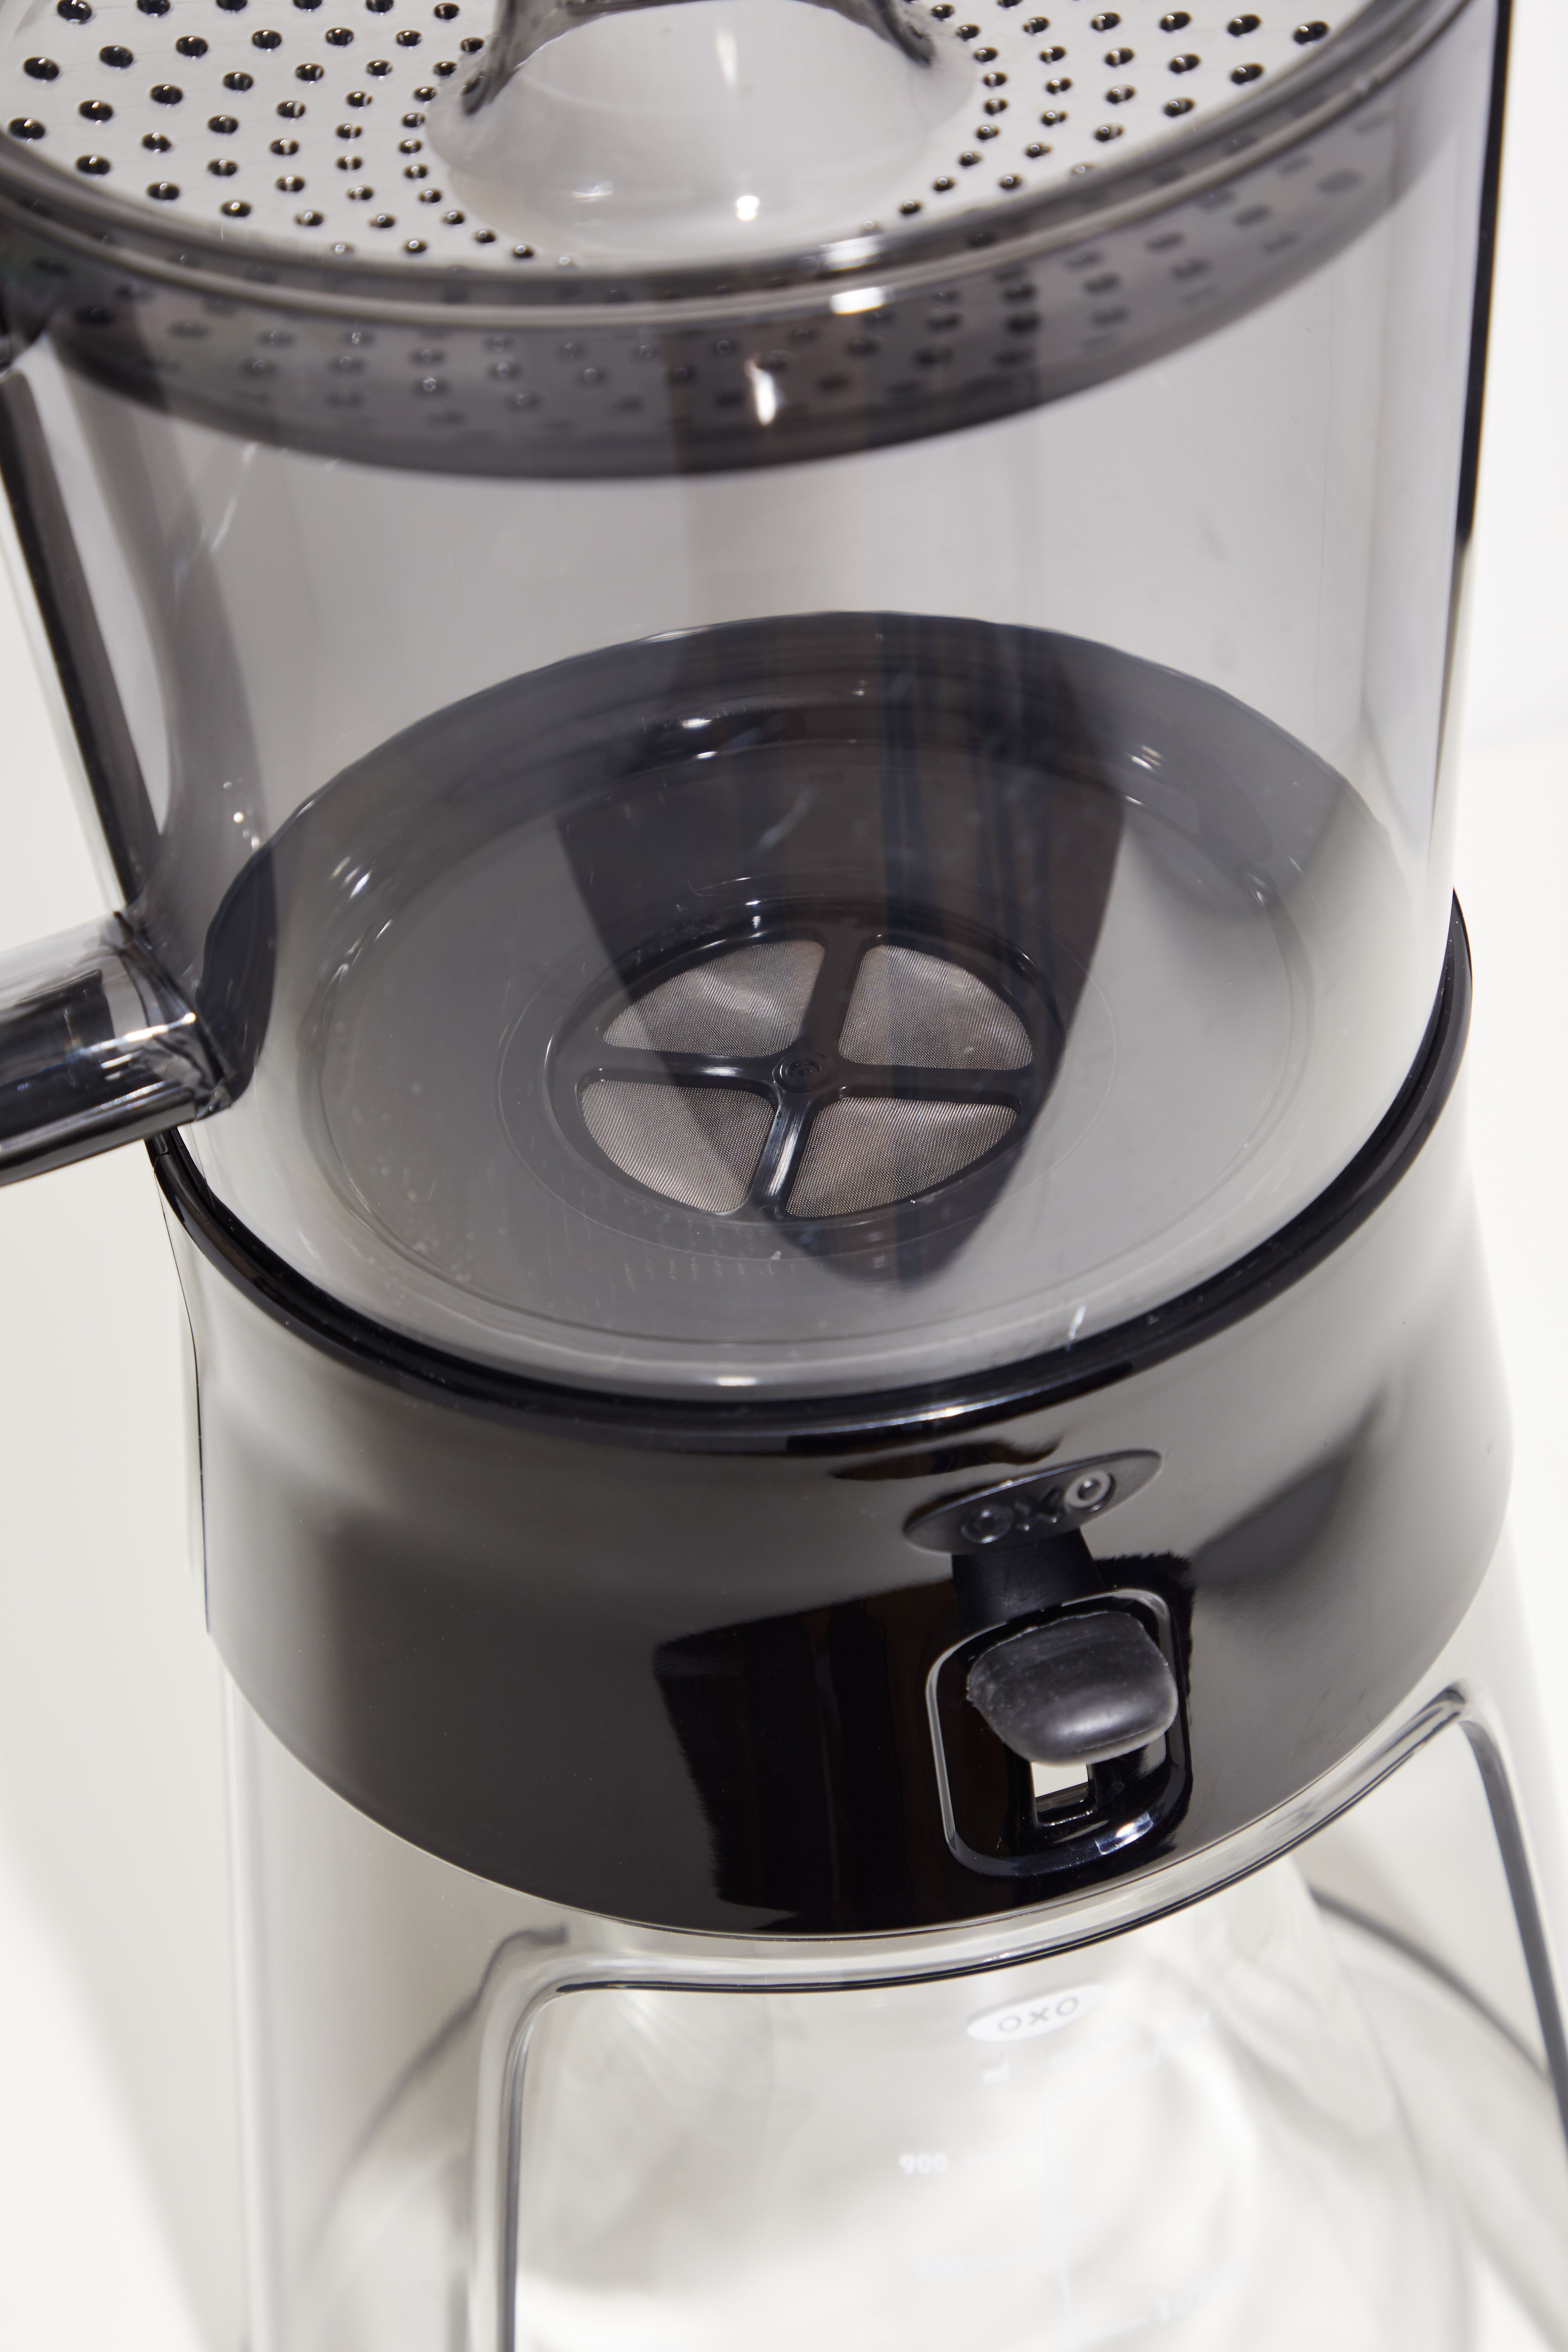 Oxo's Coffee Grinder and Brewer Make a Damn Good Cup